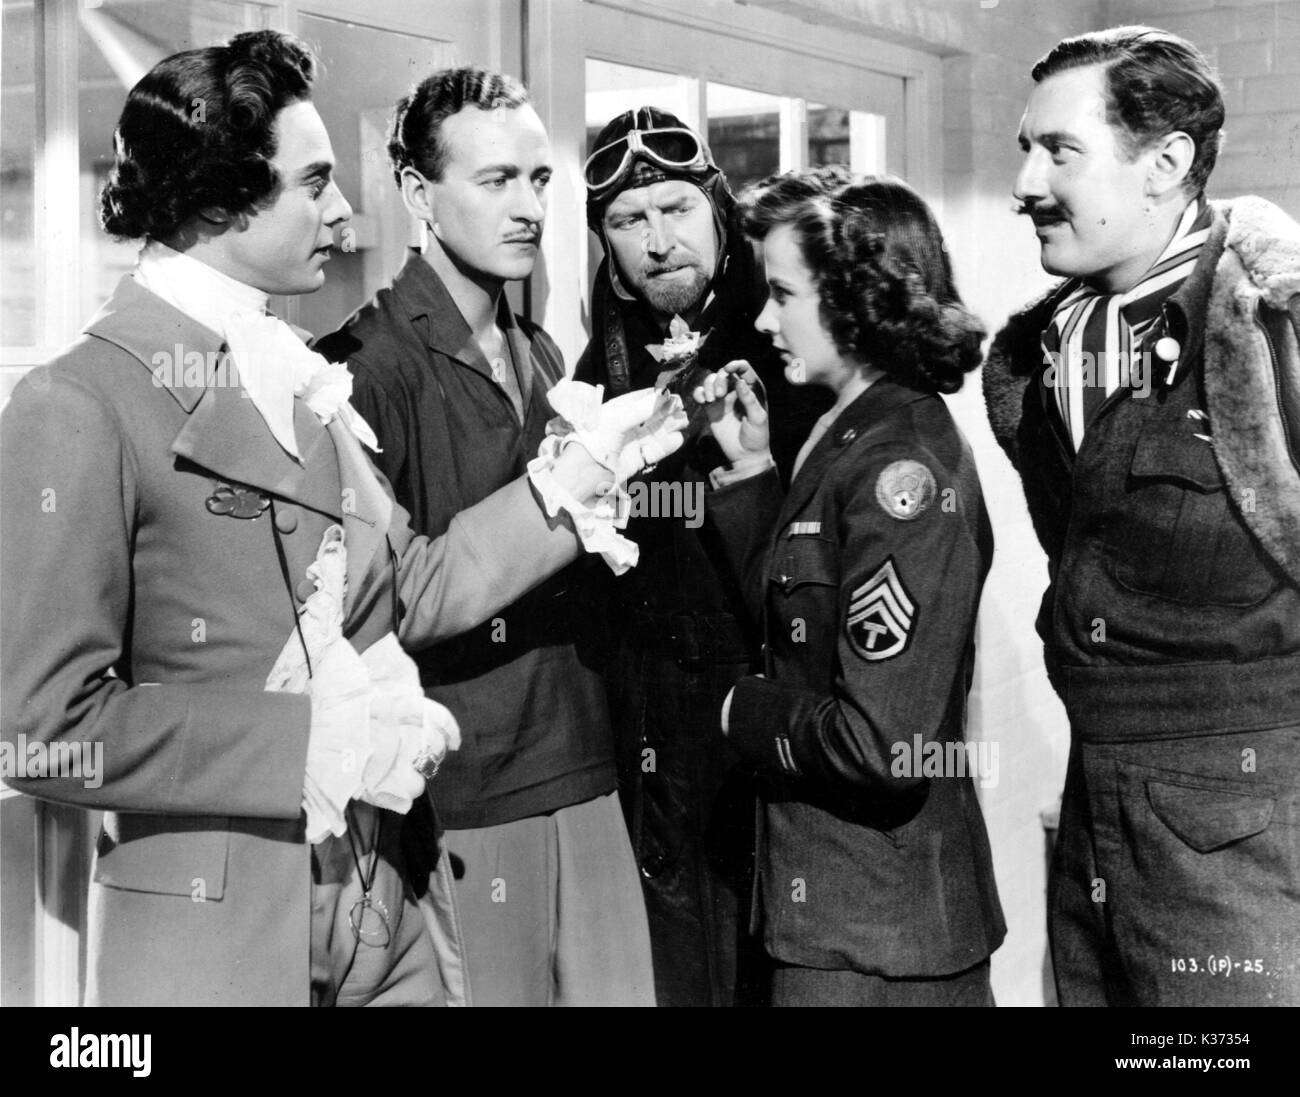 A MATTER OF LIFE AND DEATH L-R, MARIUS GORING, DAVID NIVEN, ROGER LIVESEY, KIM HUNTER, ROBERT COOTE Stock Photo